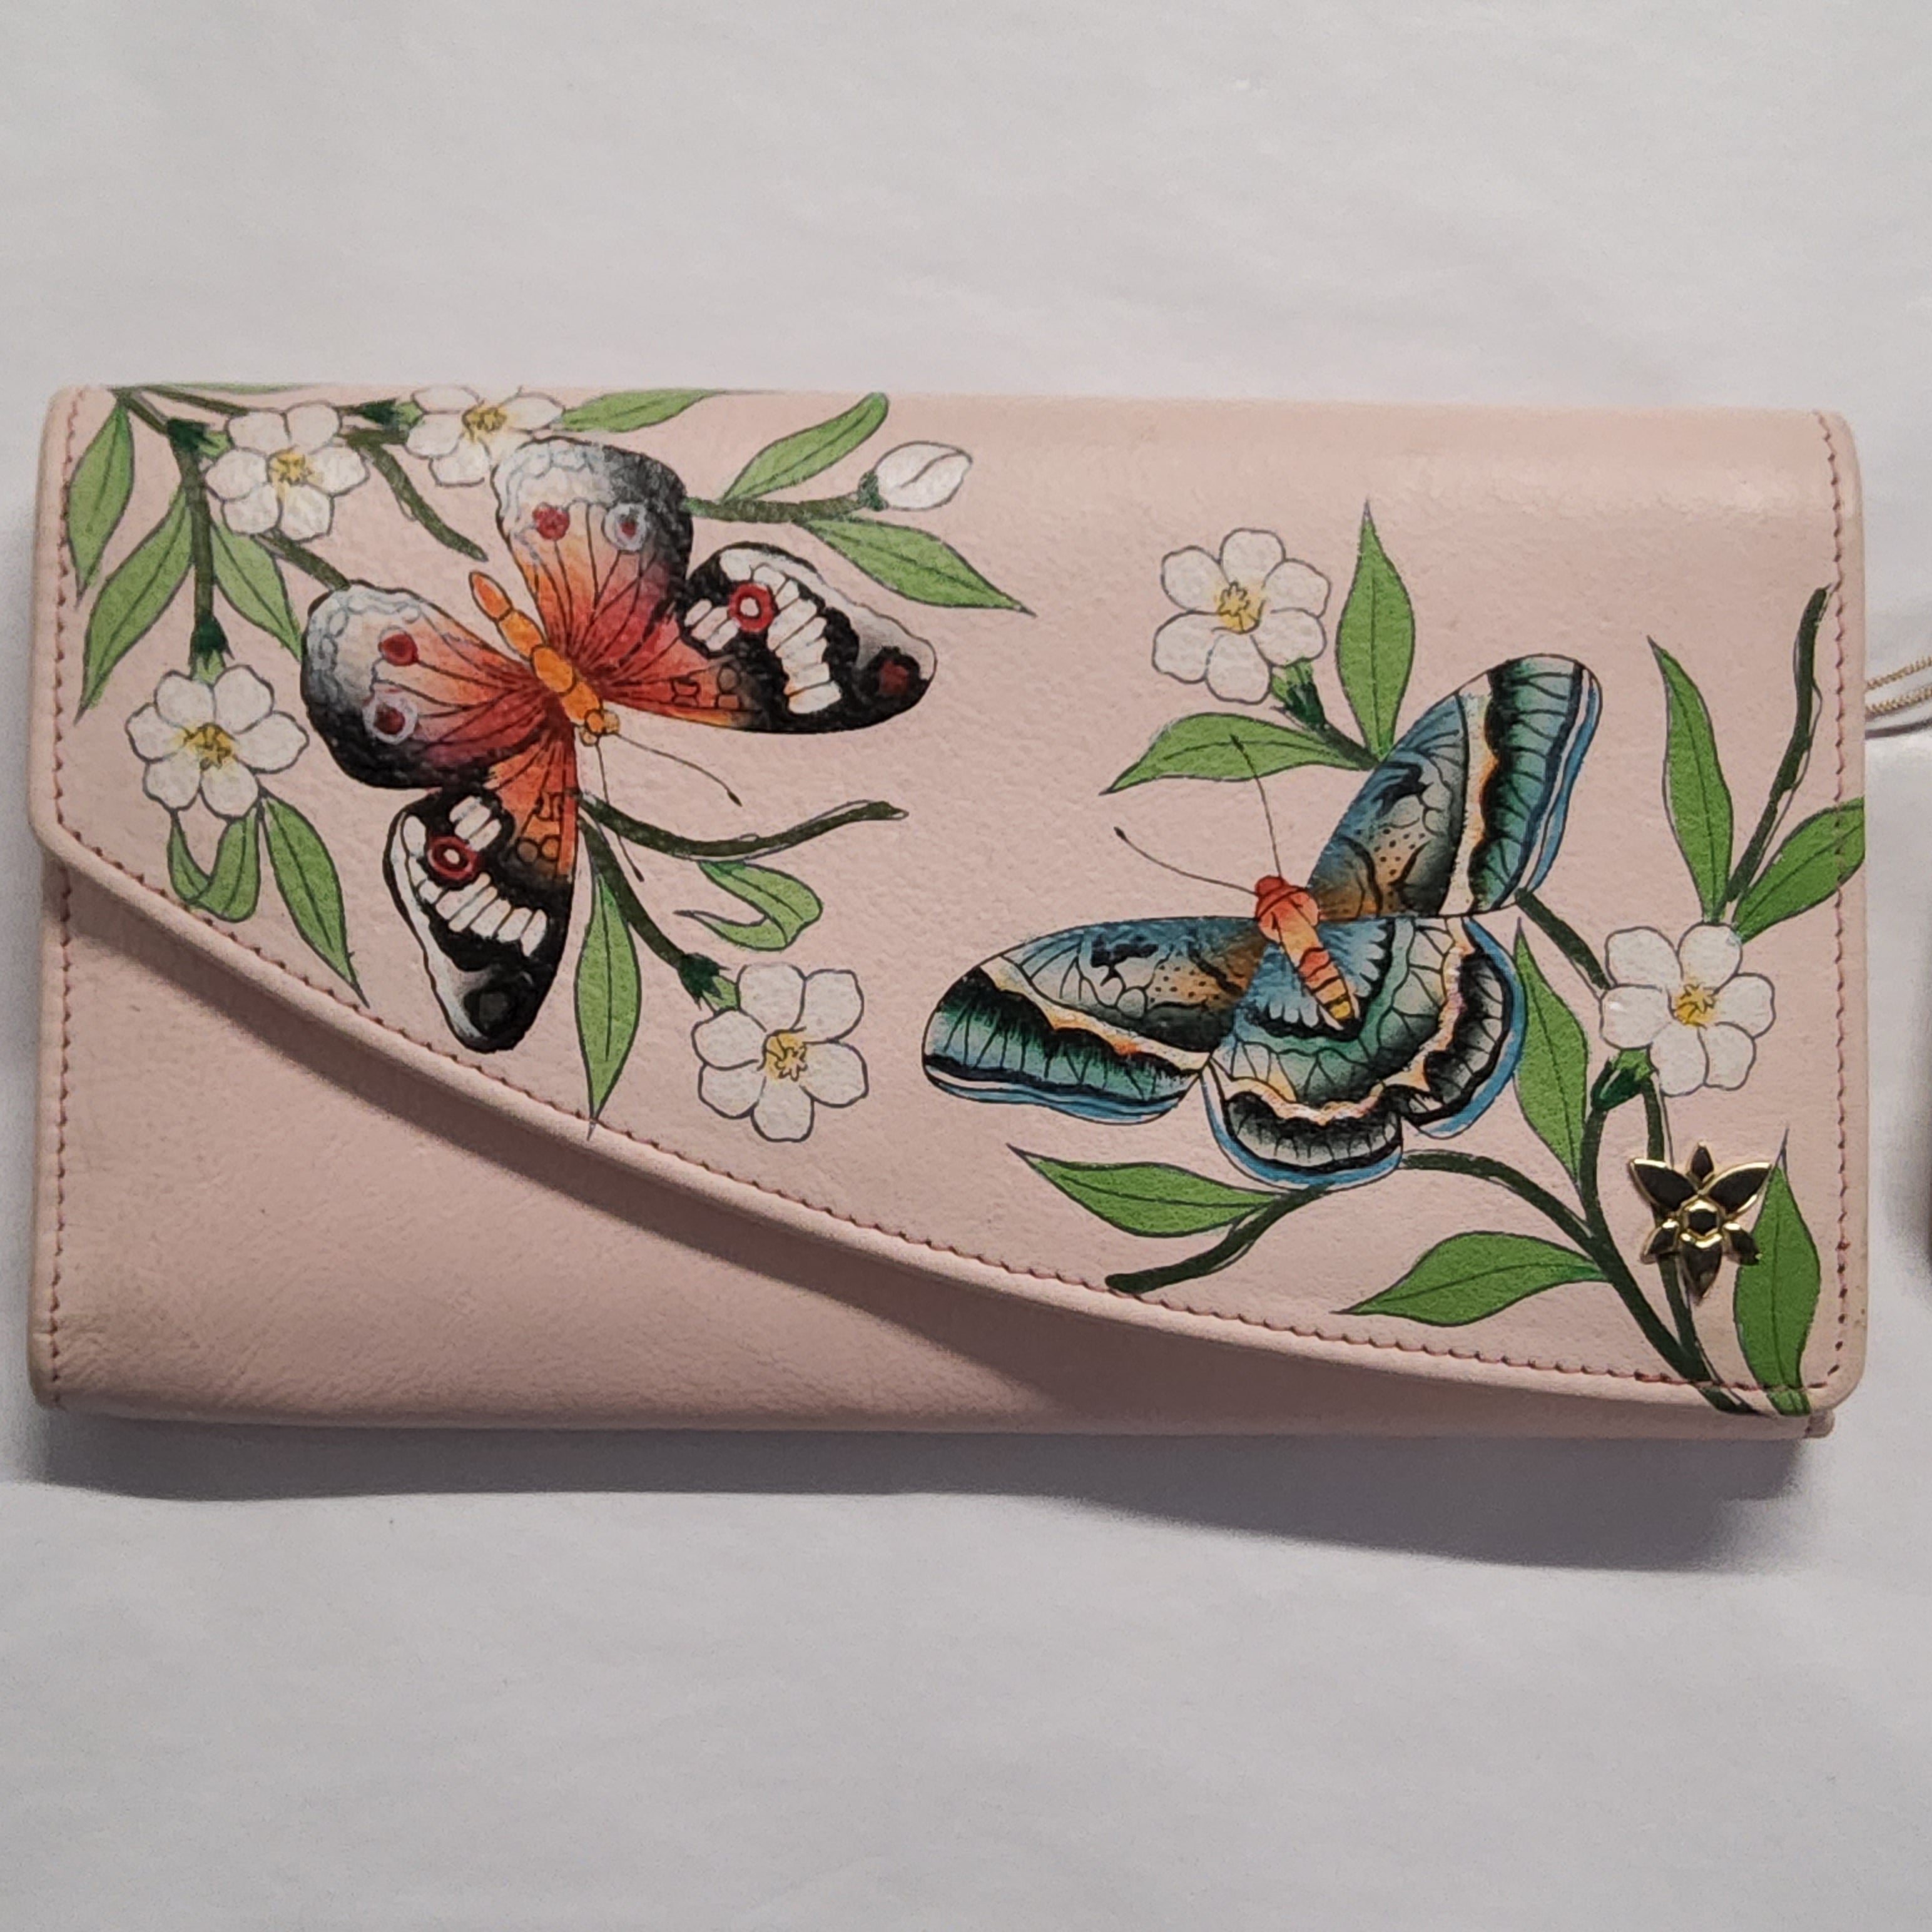 Anuschka Hand-Painted Leather Tri-Fold Wallet Flowers and Butterflies